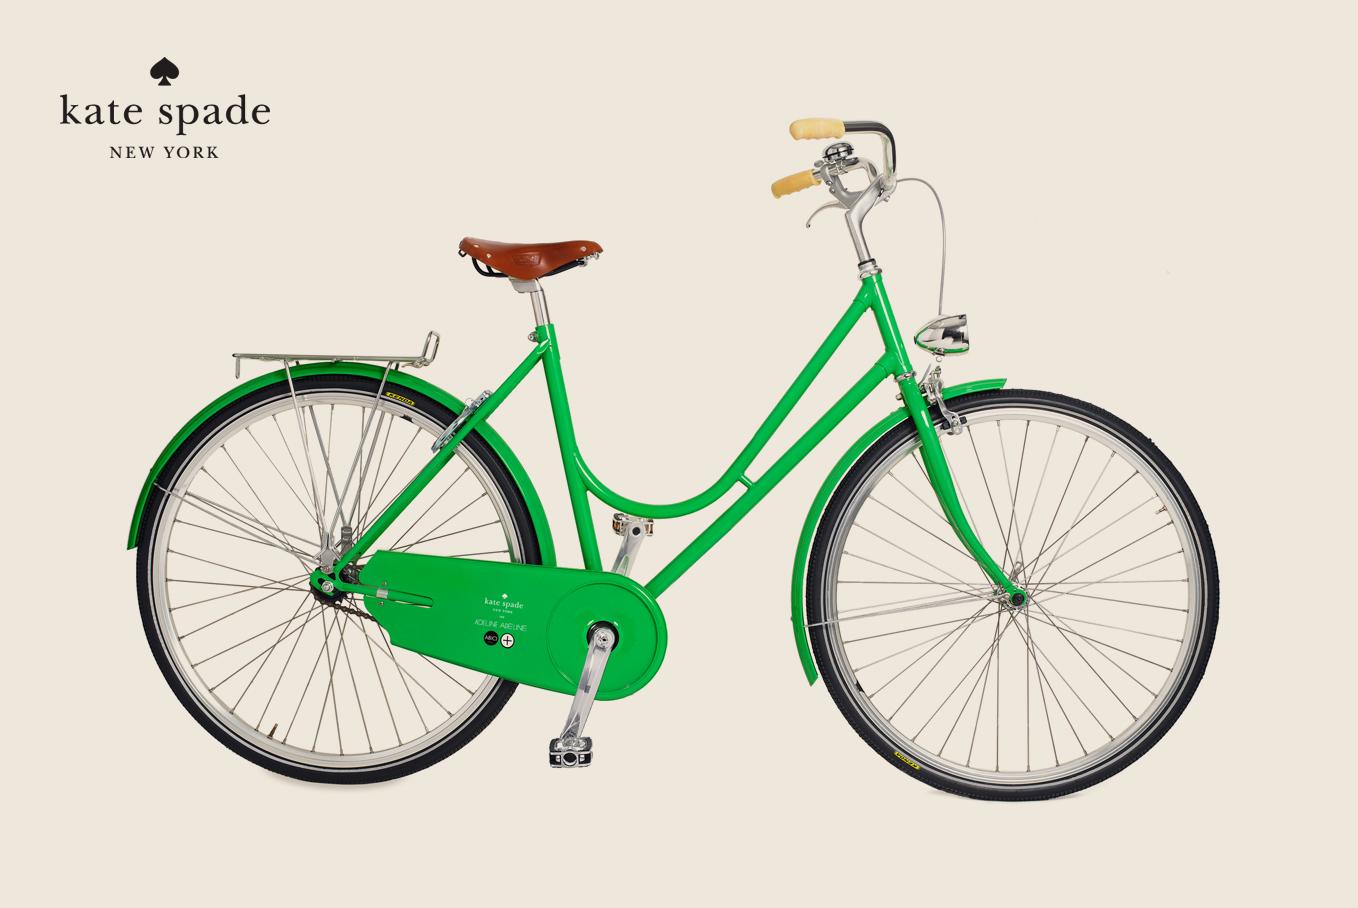 Kate Spade New York Designs Bicycle for Adeline Adeline - autoevolution